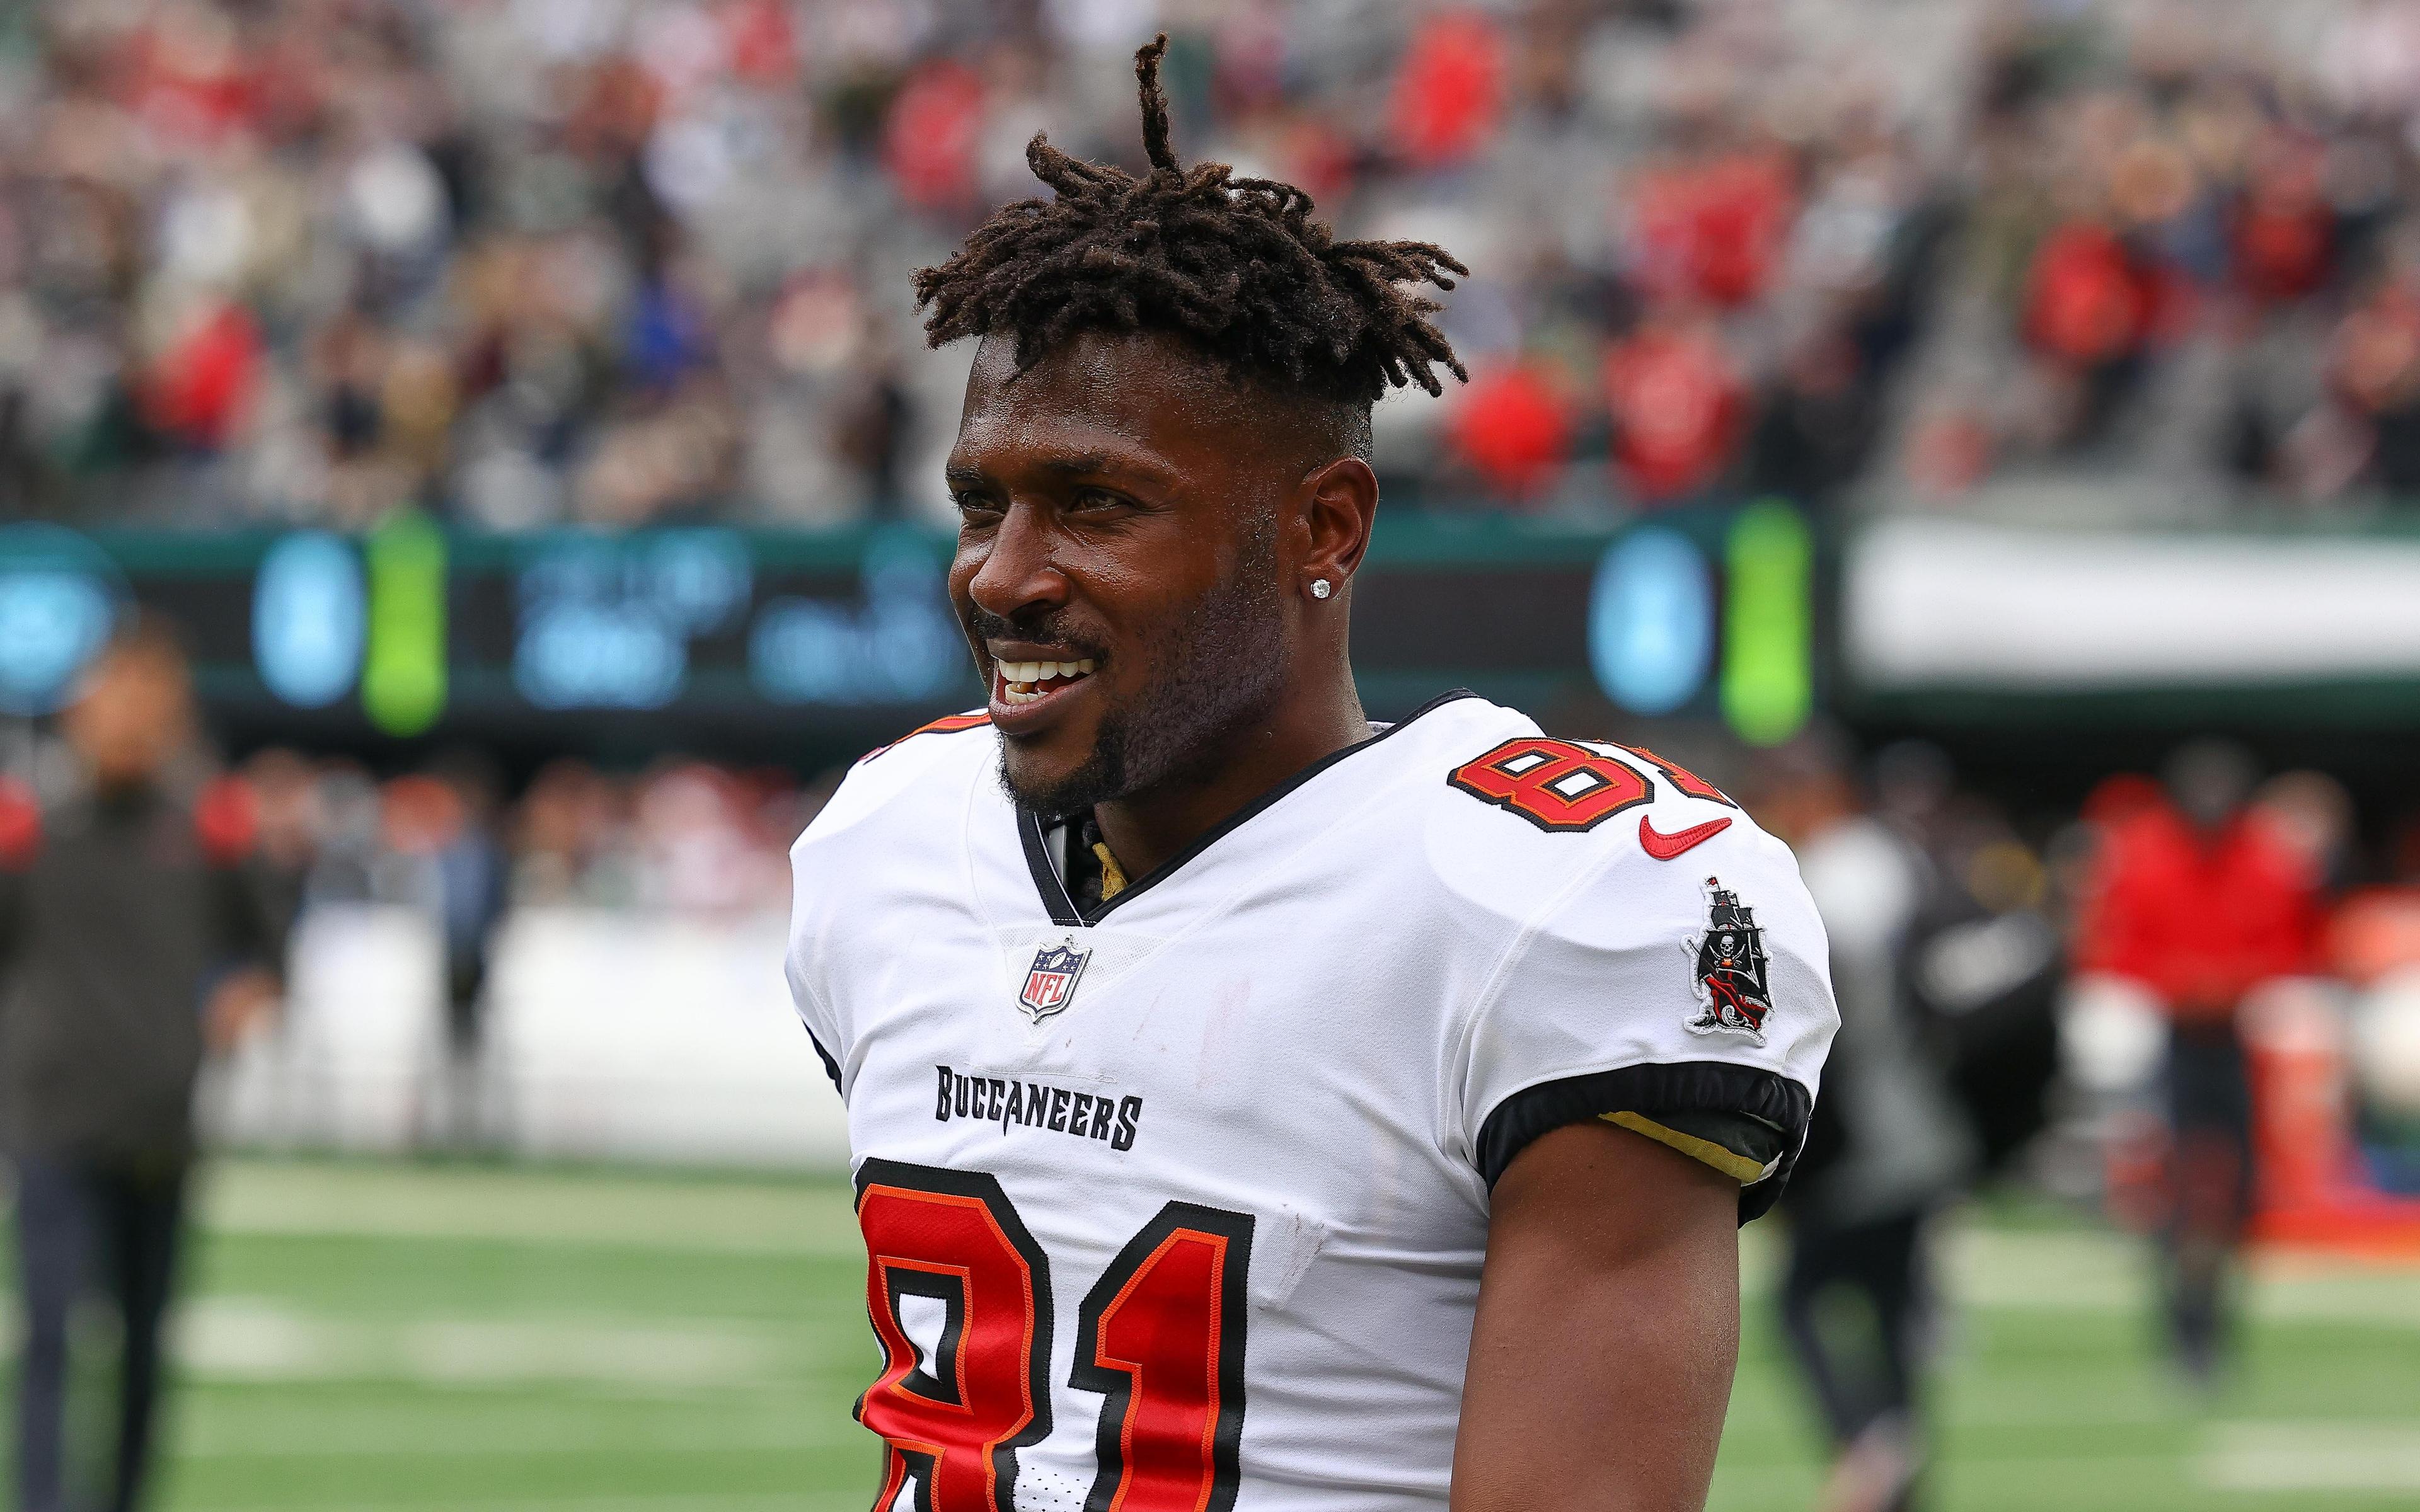 Jan 2, 2022; East Rutherford, New Jersey, USA; Tampa Bay Buccaneers wide receiver Antonio Brown (81) on the field before the game against the New York Jets during the second half at MetLife Stadium. Mandatory Credit: Vincent Carchietta-USA TODAY Sports / © Vincent Carchietta-USA TODAY Sports